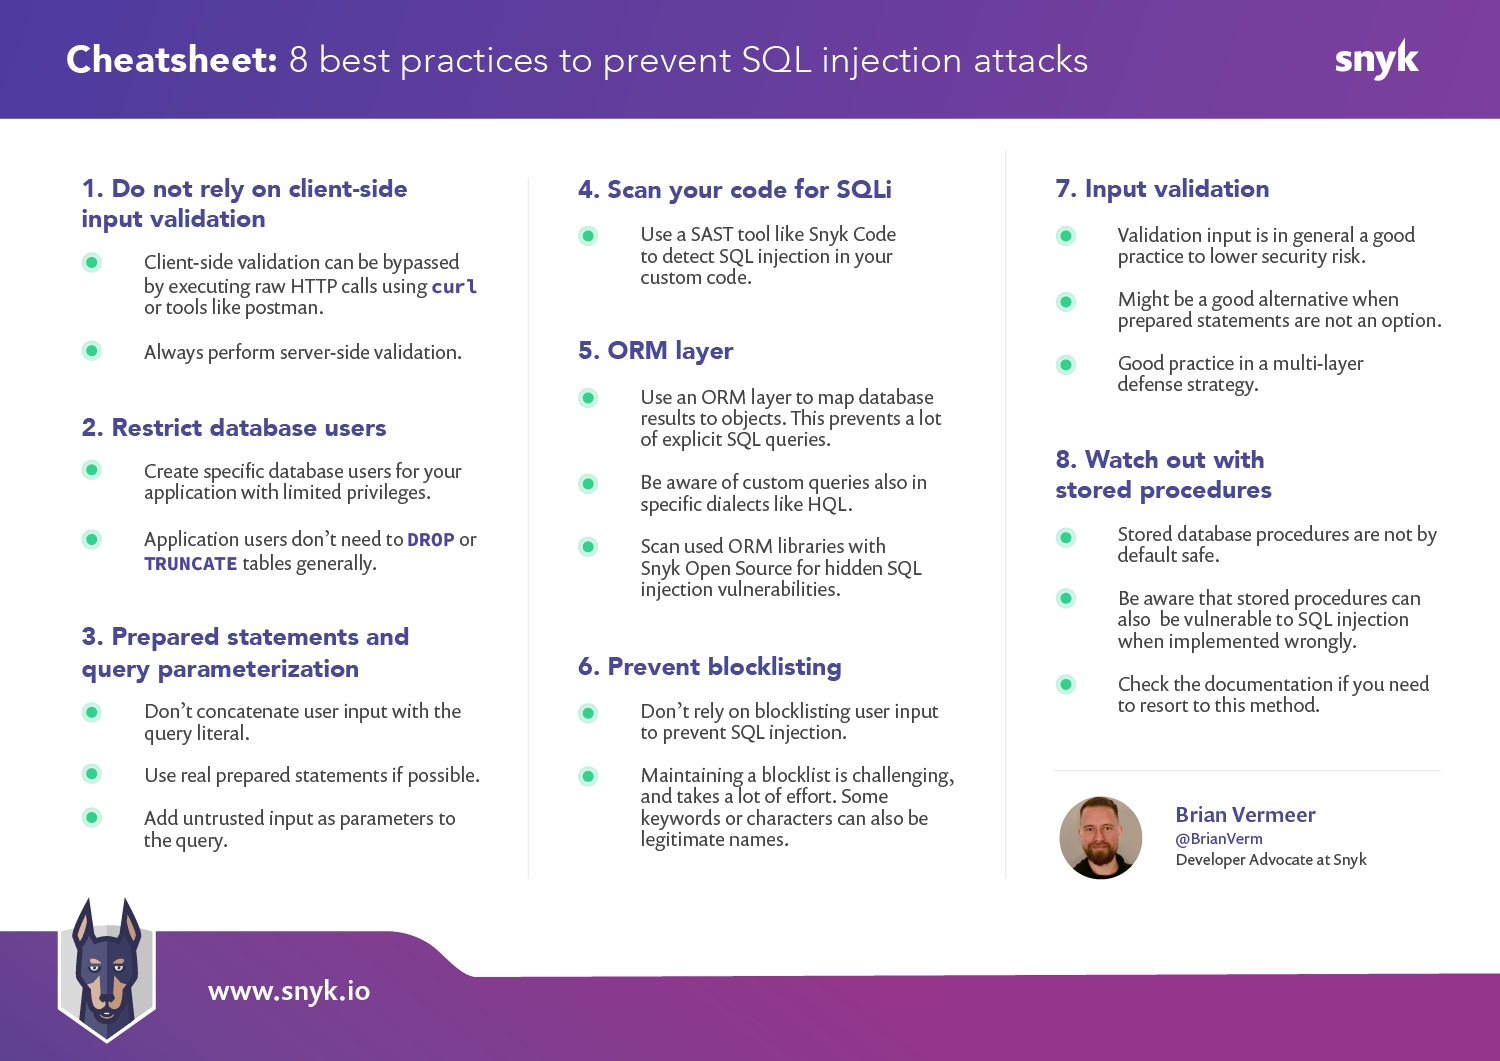 Preventing SQL Injection Attacks With Python – Real Python